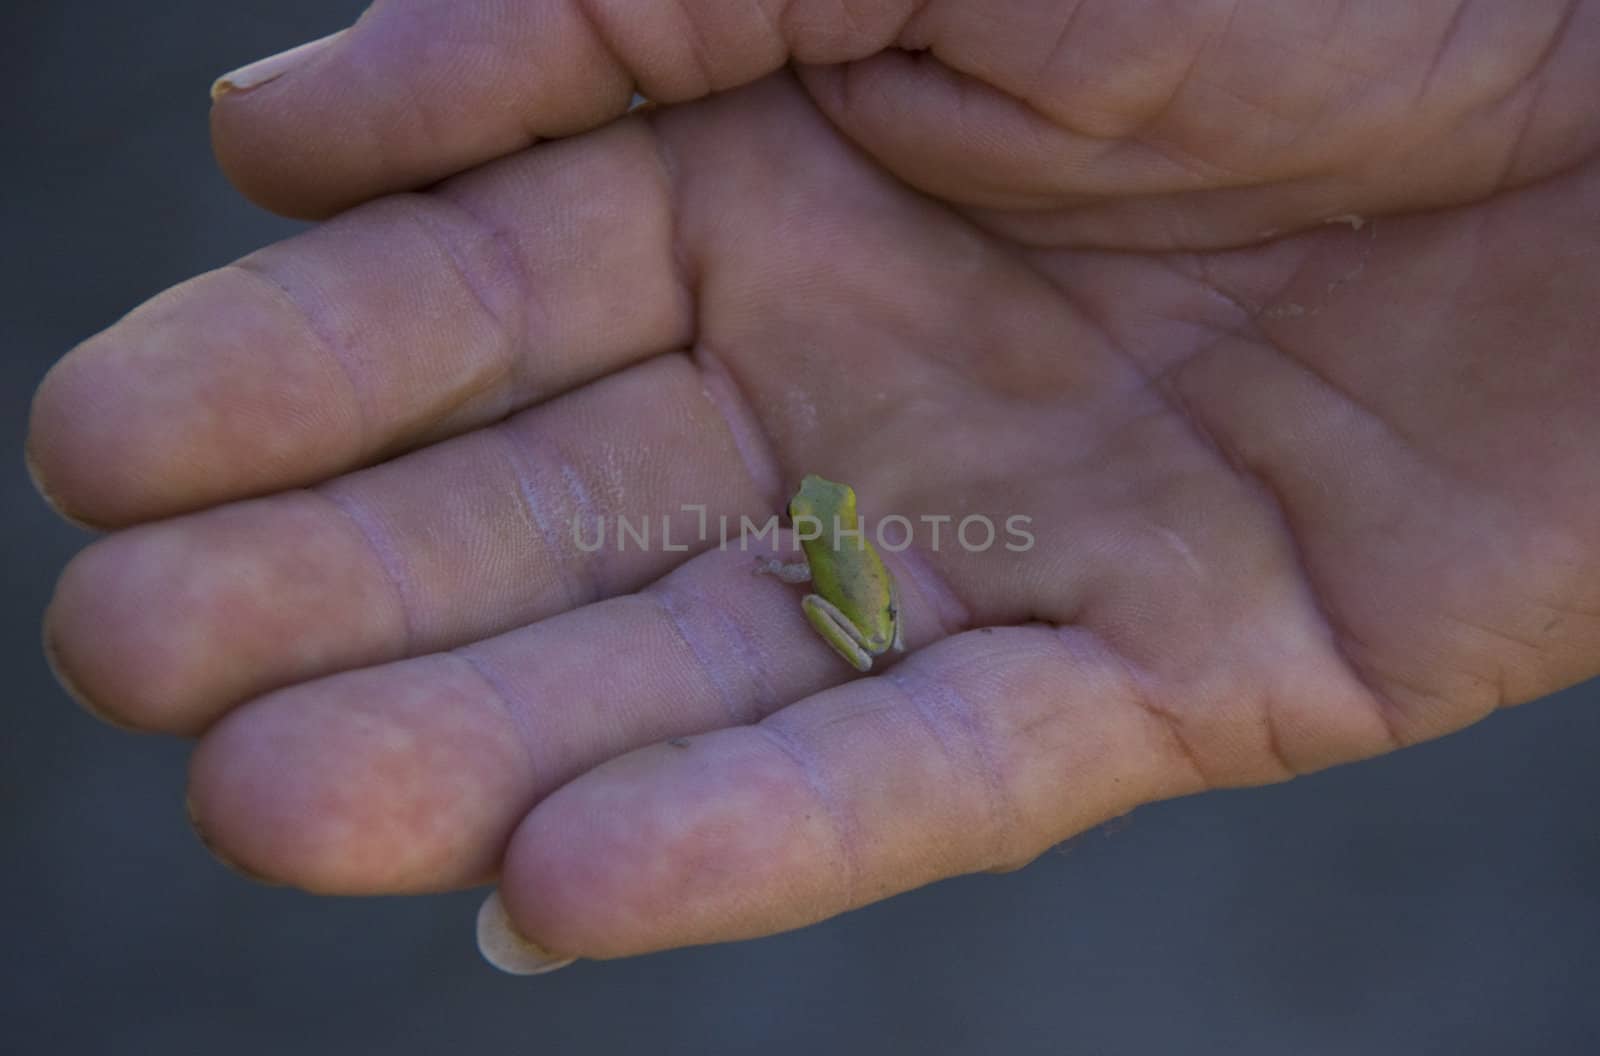 One of the smallest frogs in the world, an Australian native, rests in a man's  hand.